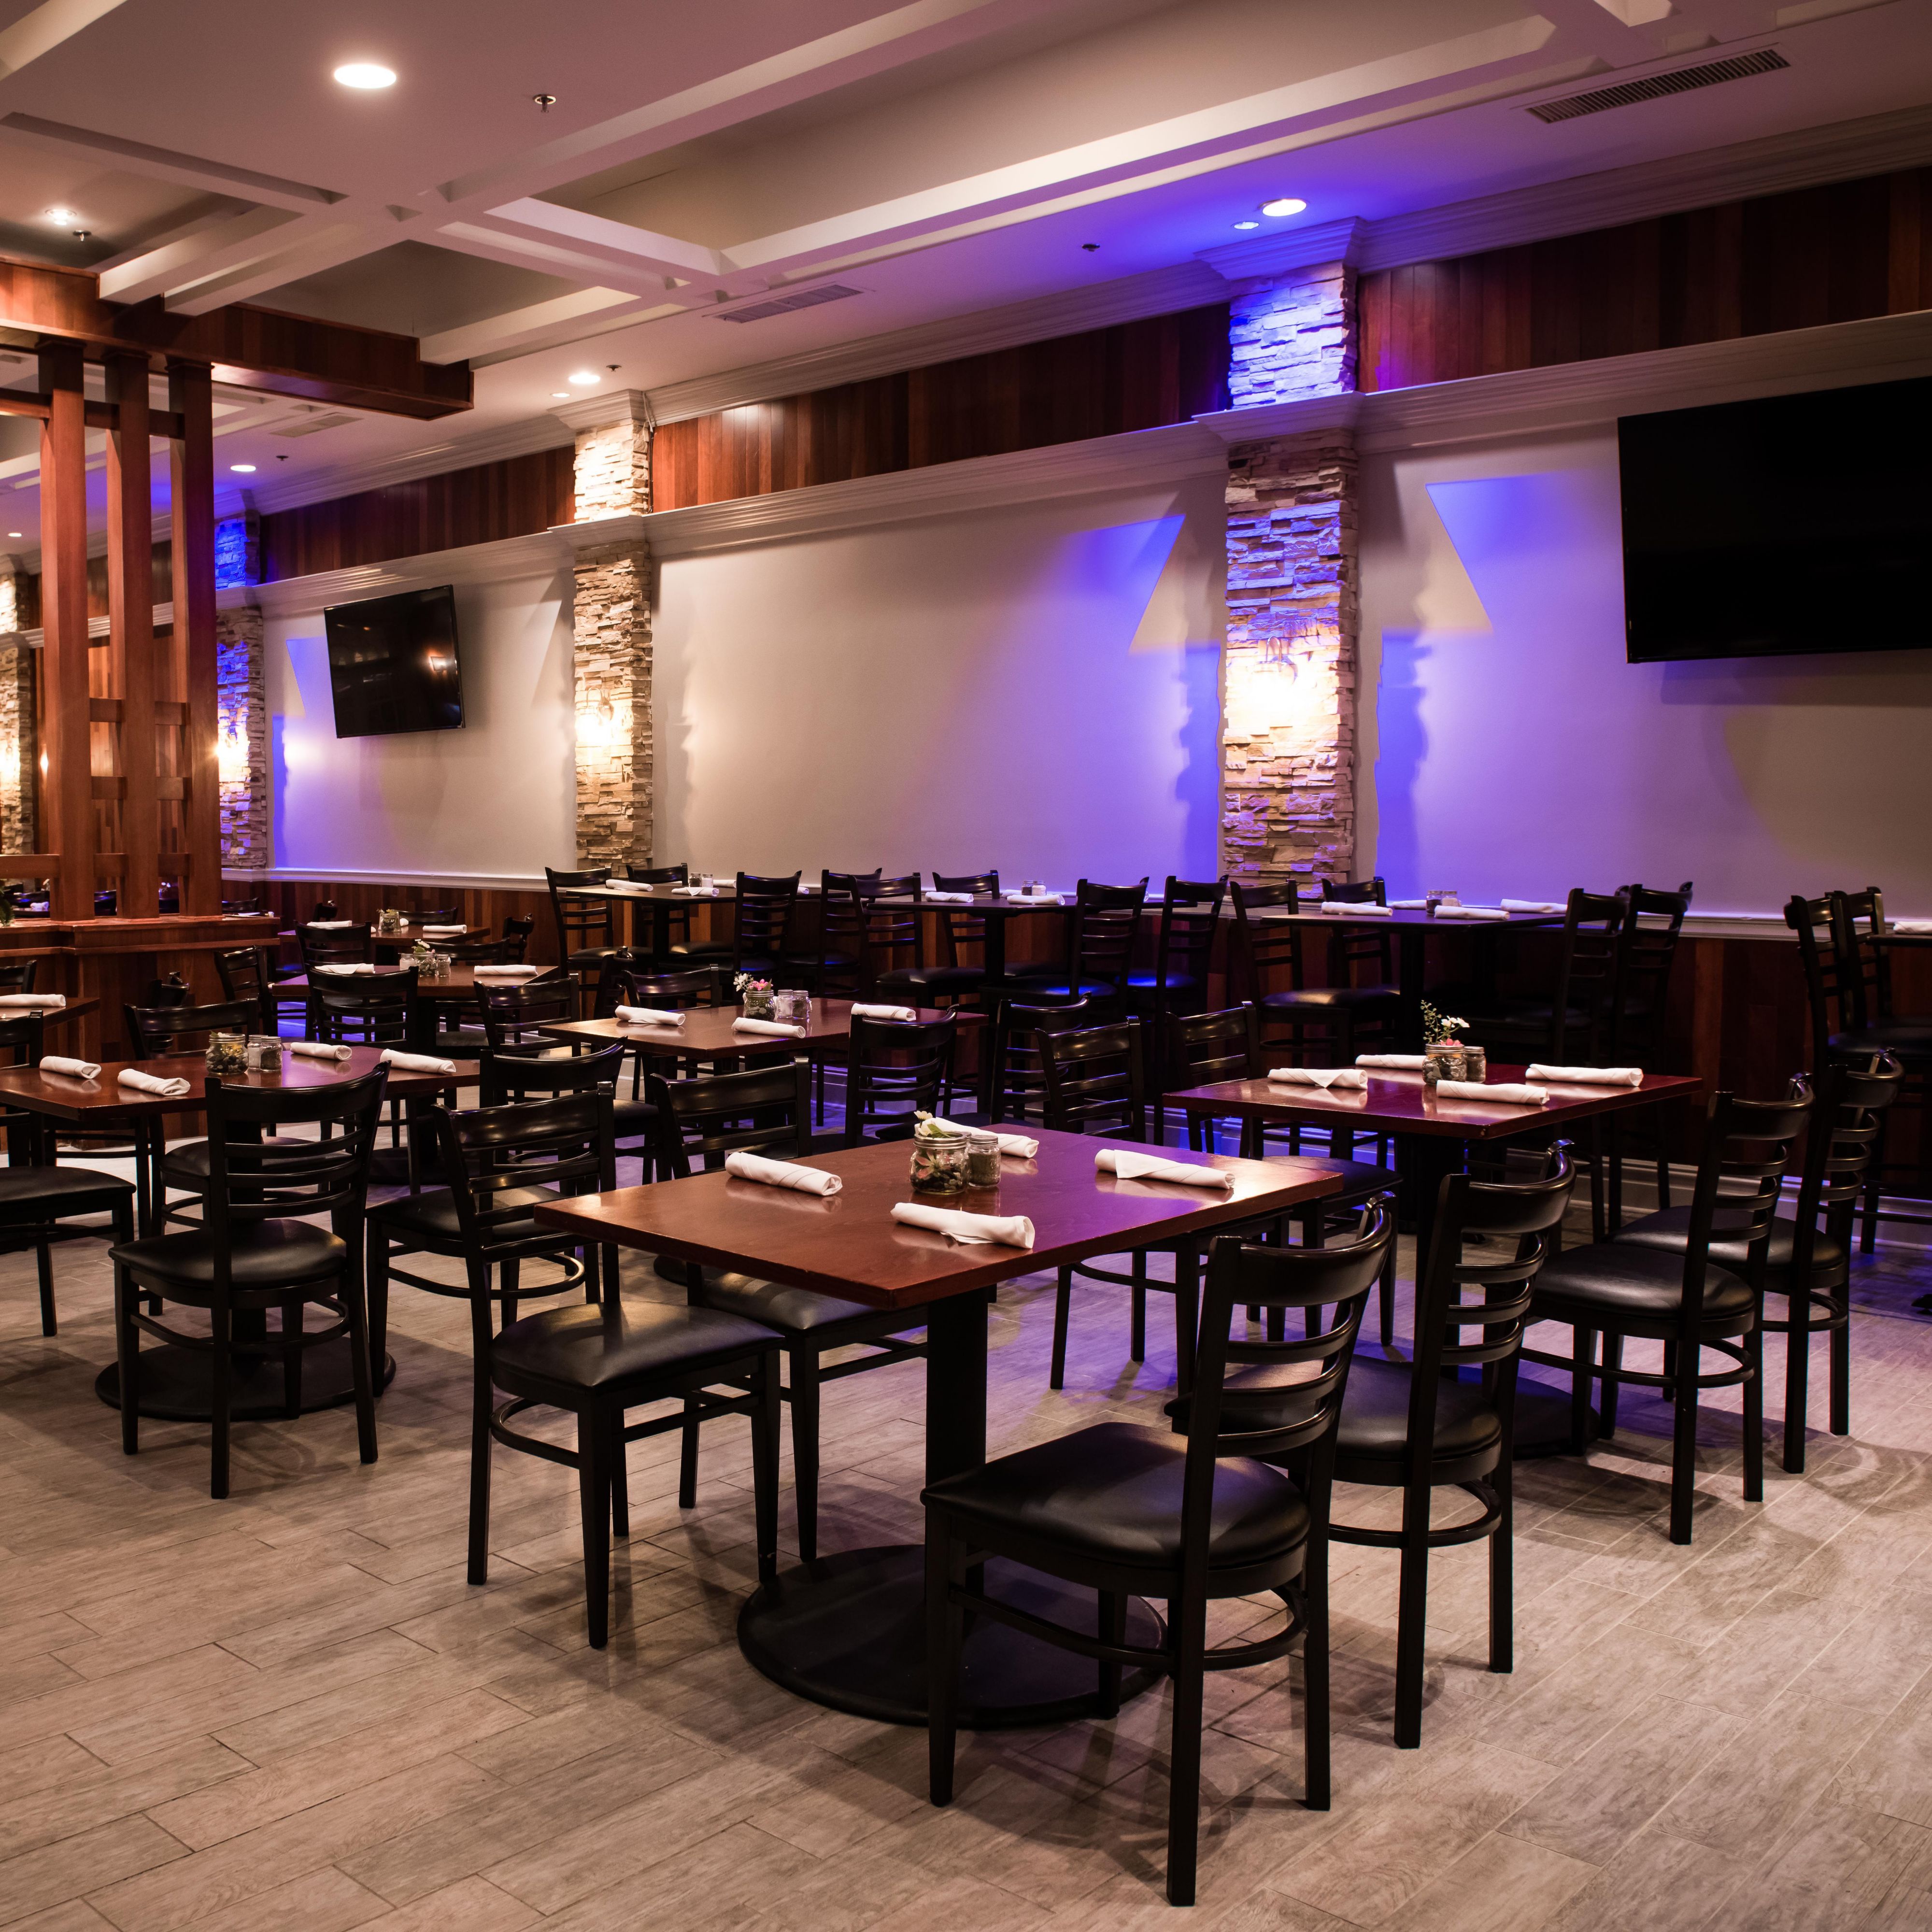 Embers Restaurant featuring spacious seating and TVs throughout